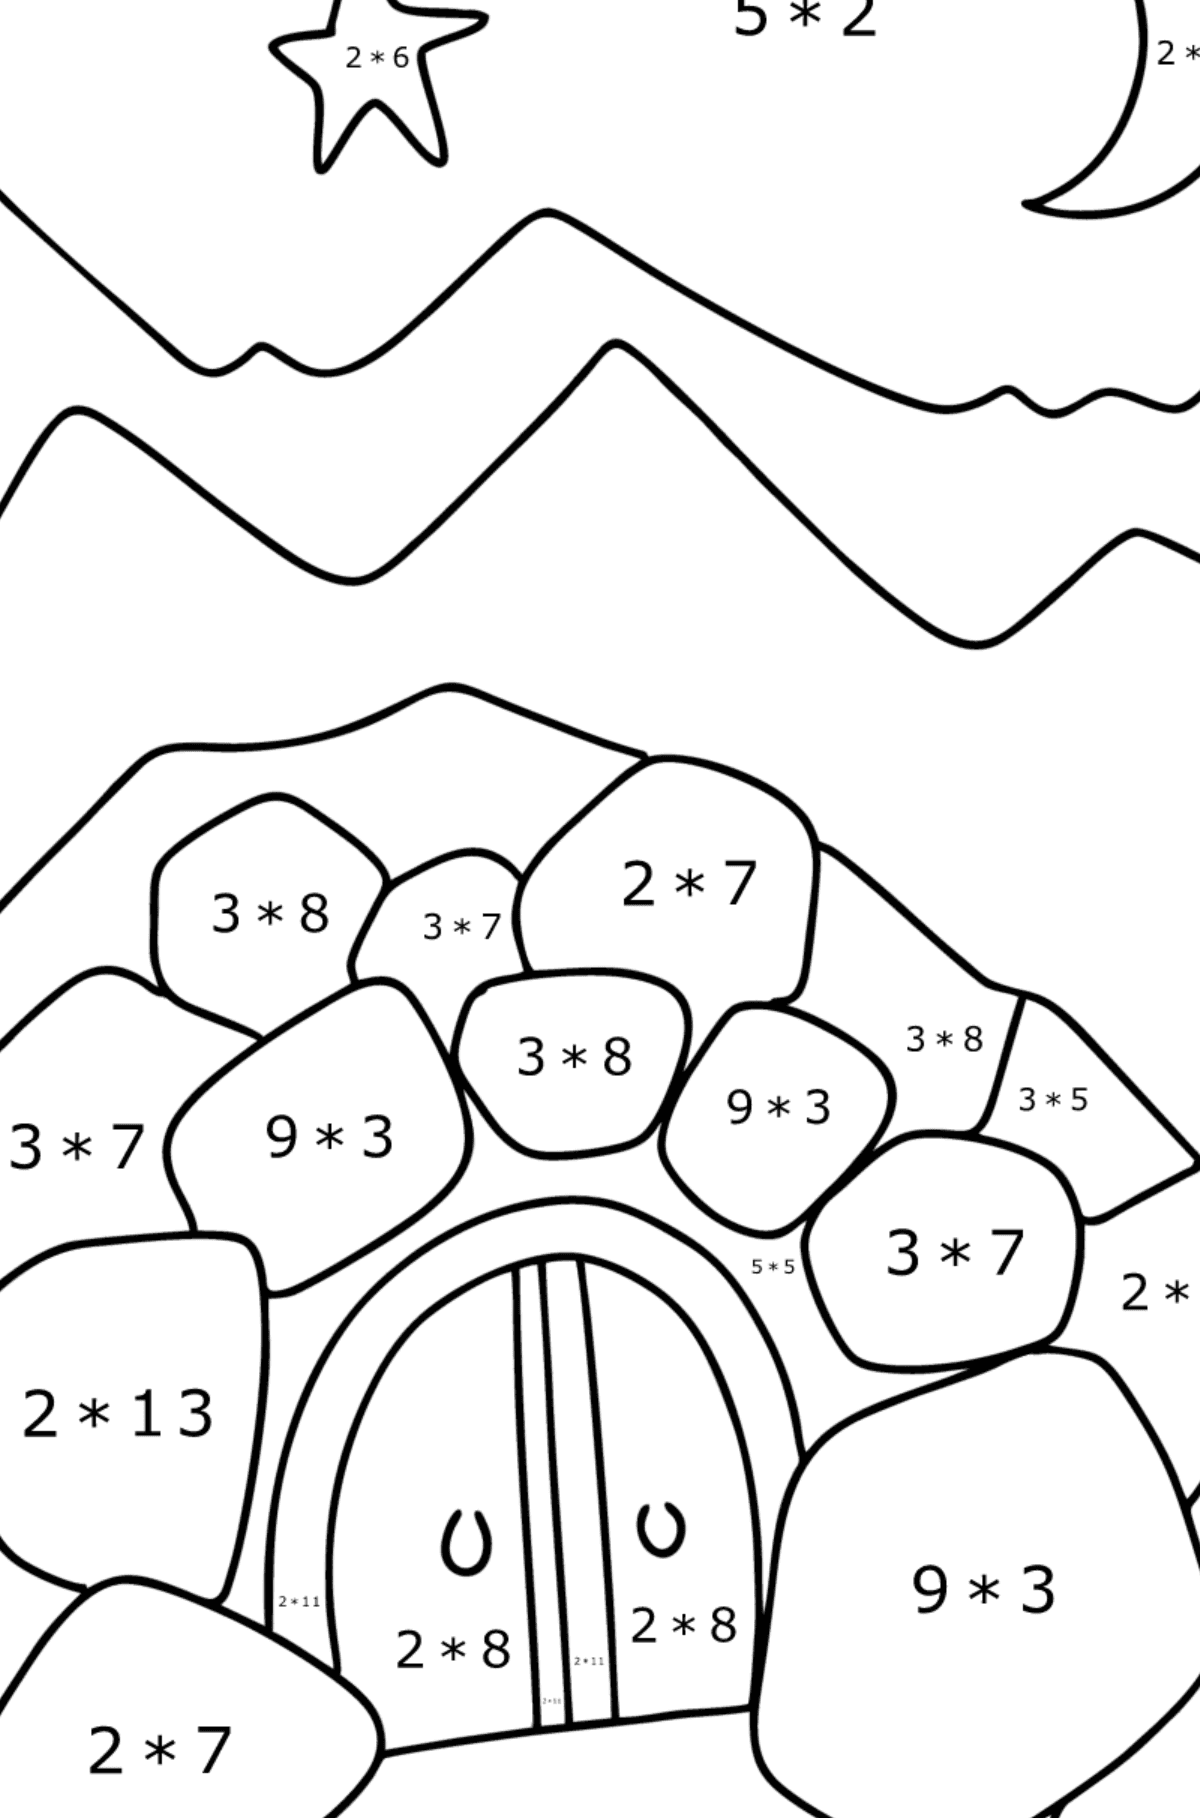 Ali Baba Cave coloring page - Math Coloring - Multiplication for Kids